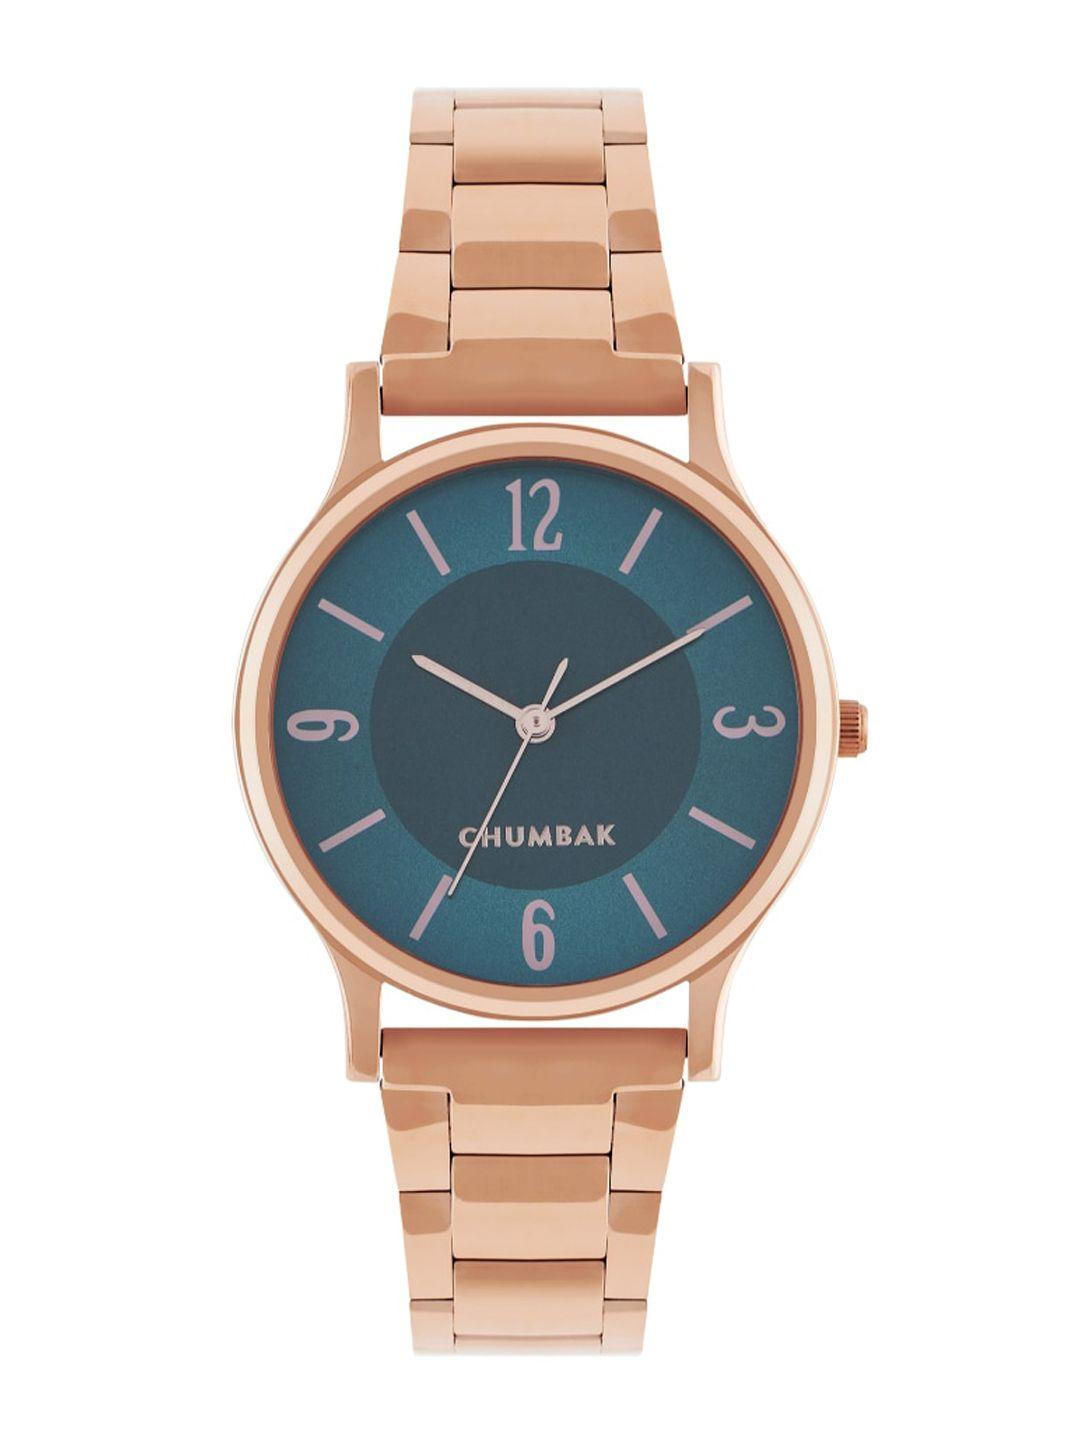 teal-by-chumbak-women-blue-brass-patterned-dial-&-rose-gold-plated-analogue-watch